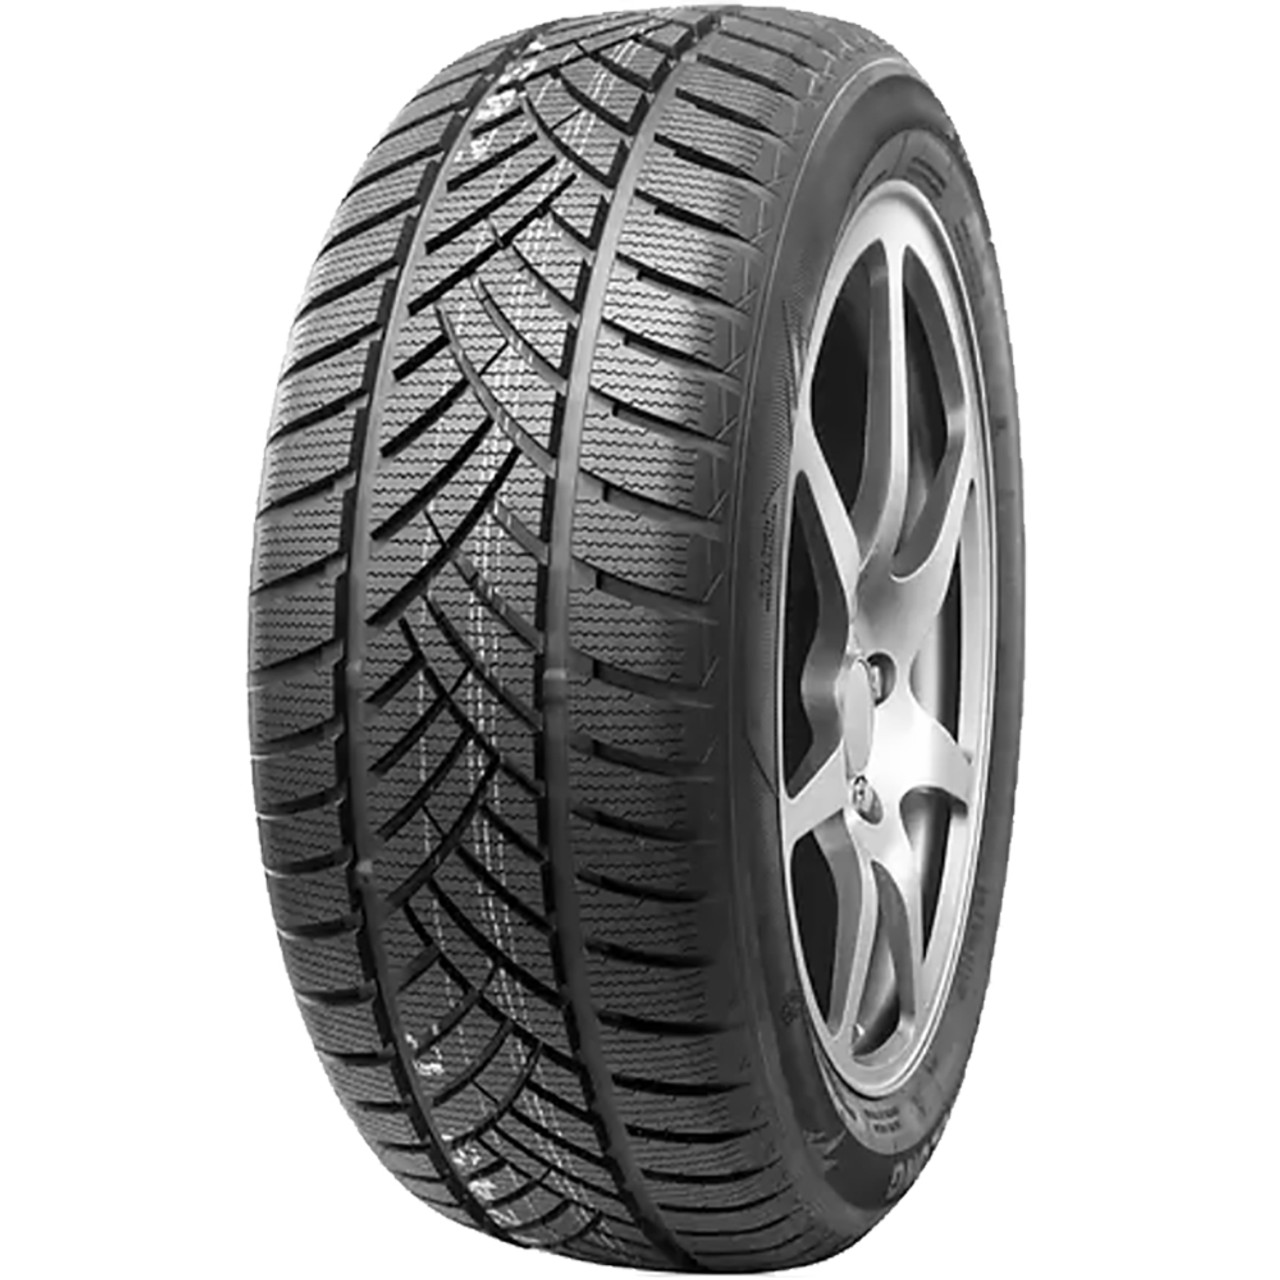 Gomme Nuove Leao 155/65 R14 75T WINT.DEFENDER HP M+S pneumatici nuovi Invernale